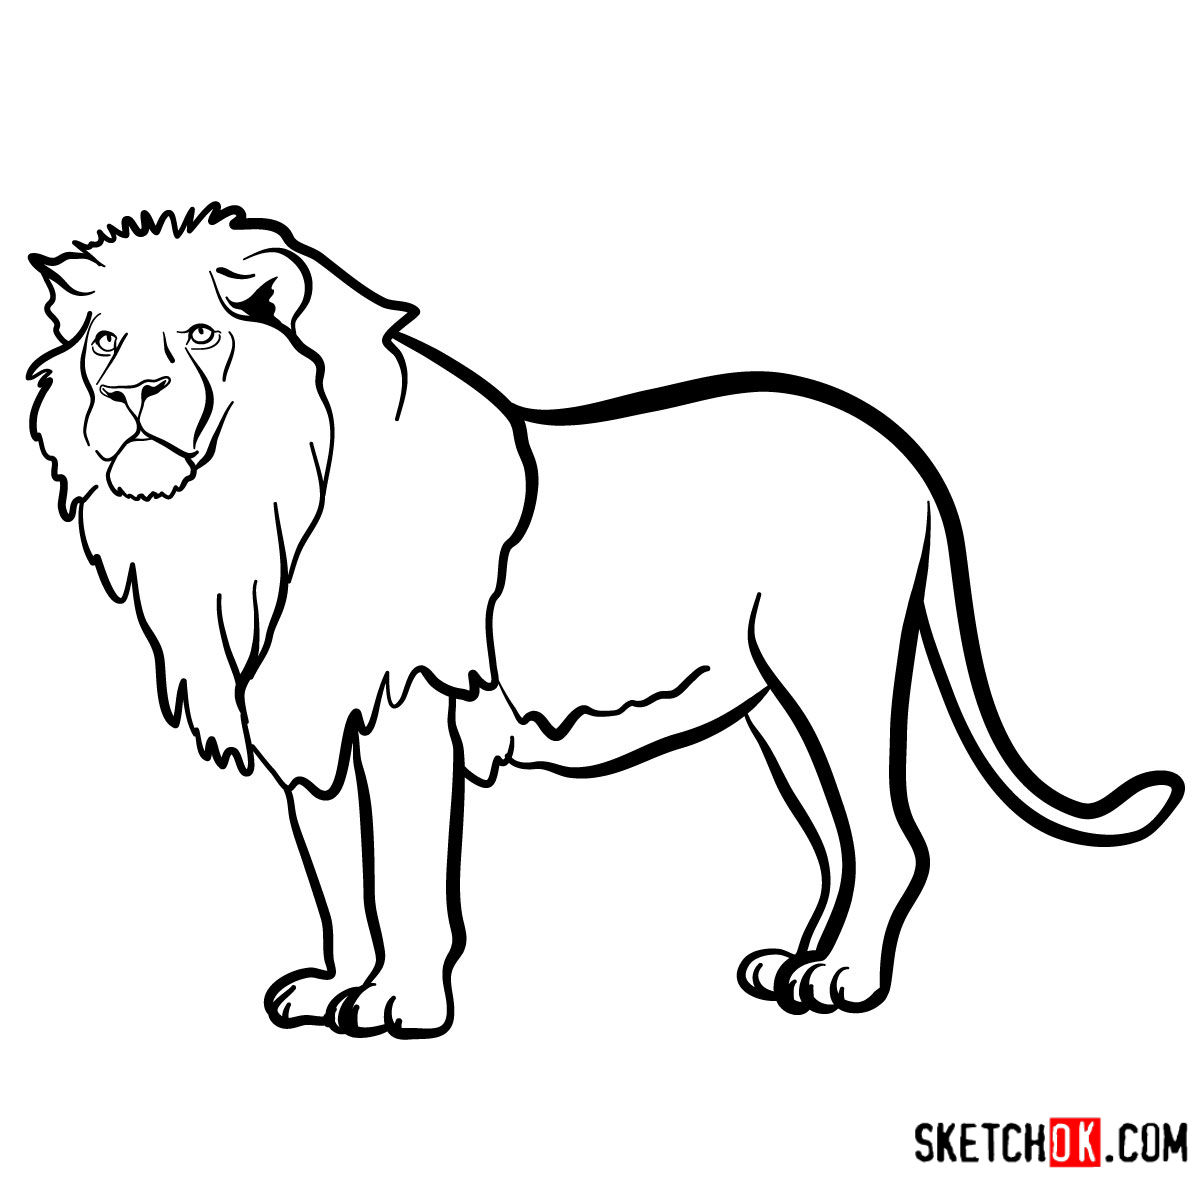 How to draw a Lion standing | Wild Animals - Sketchok easy drawing guides